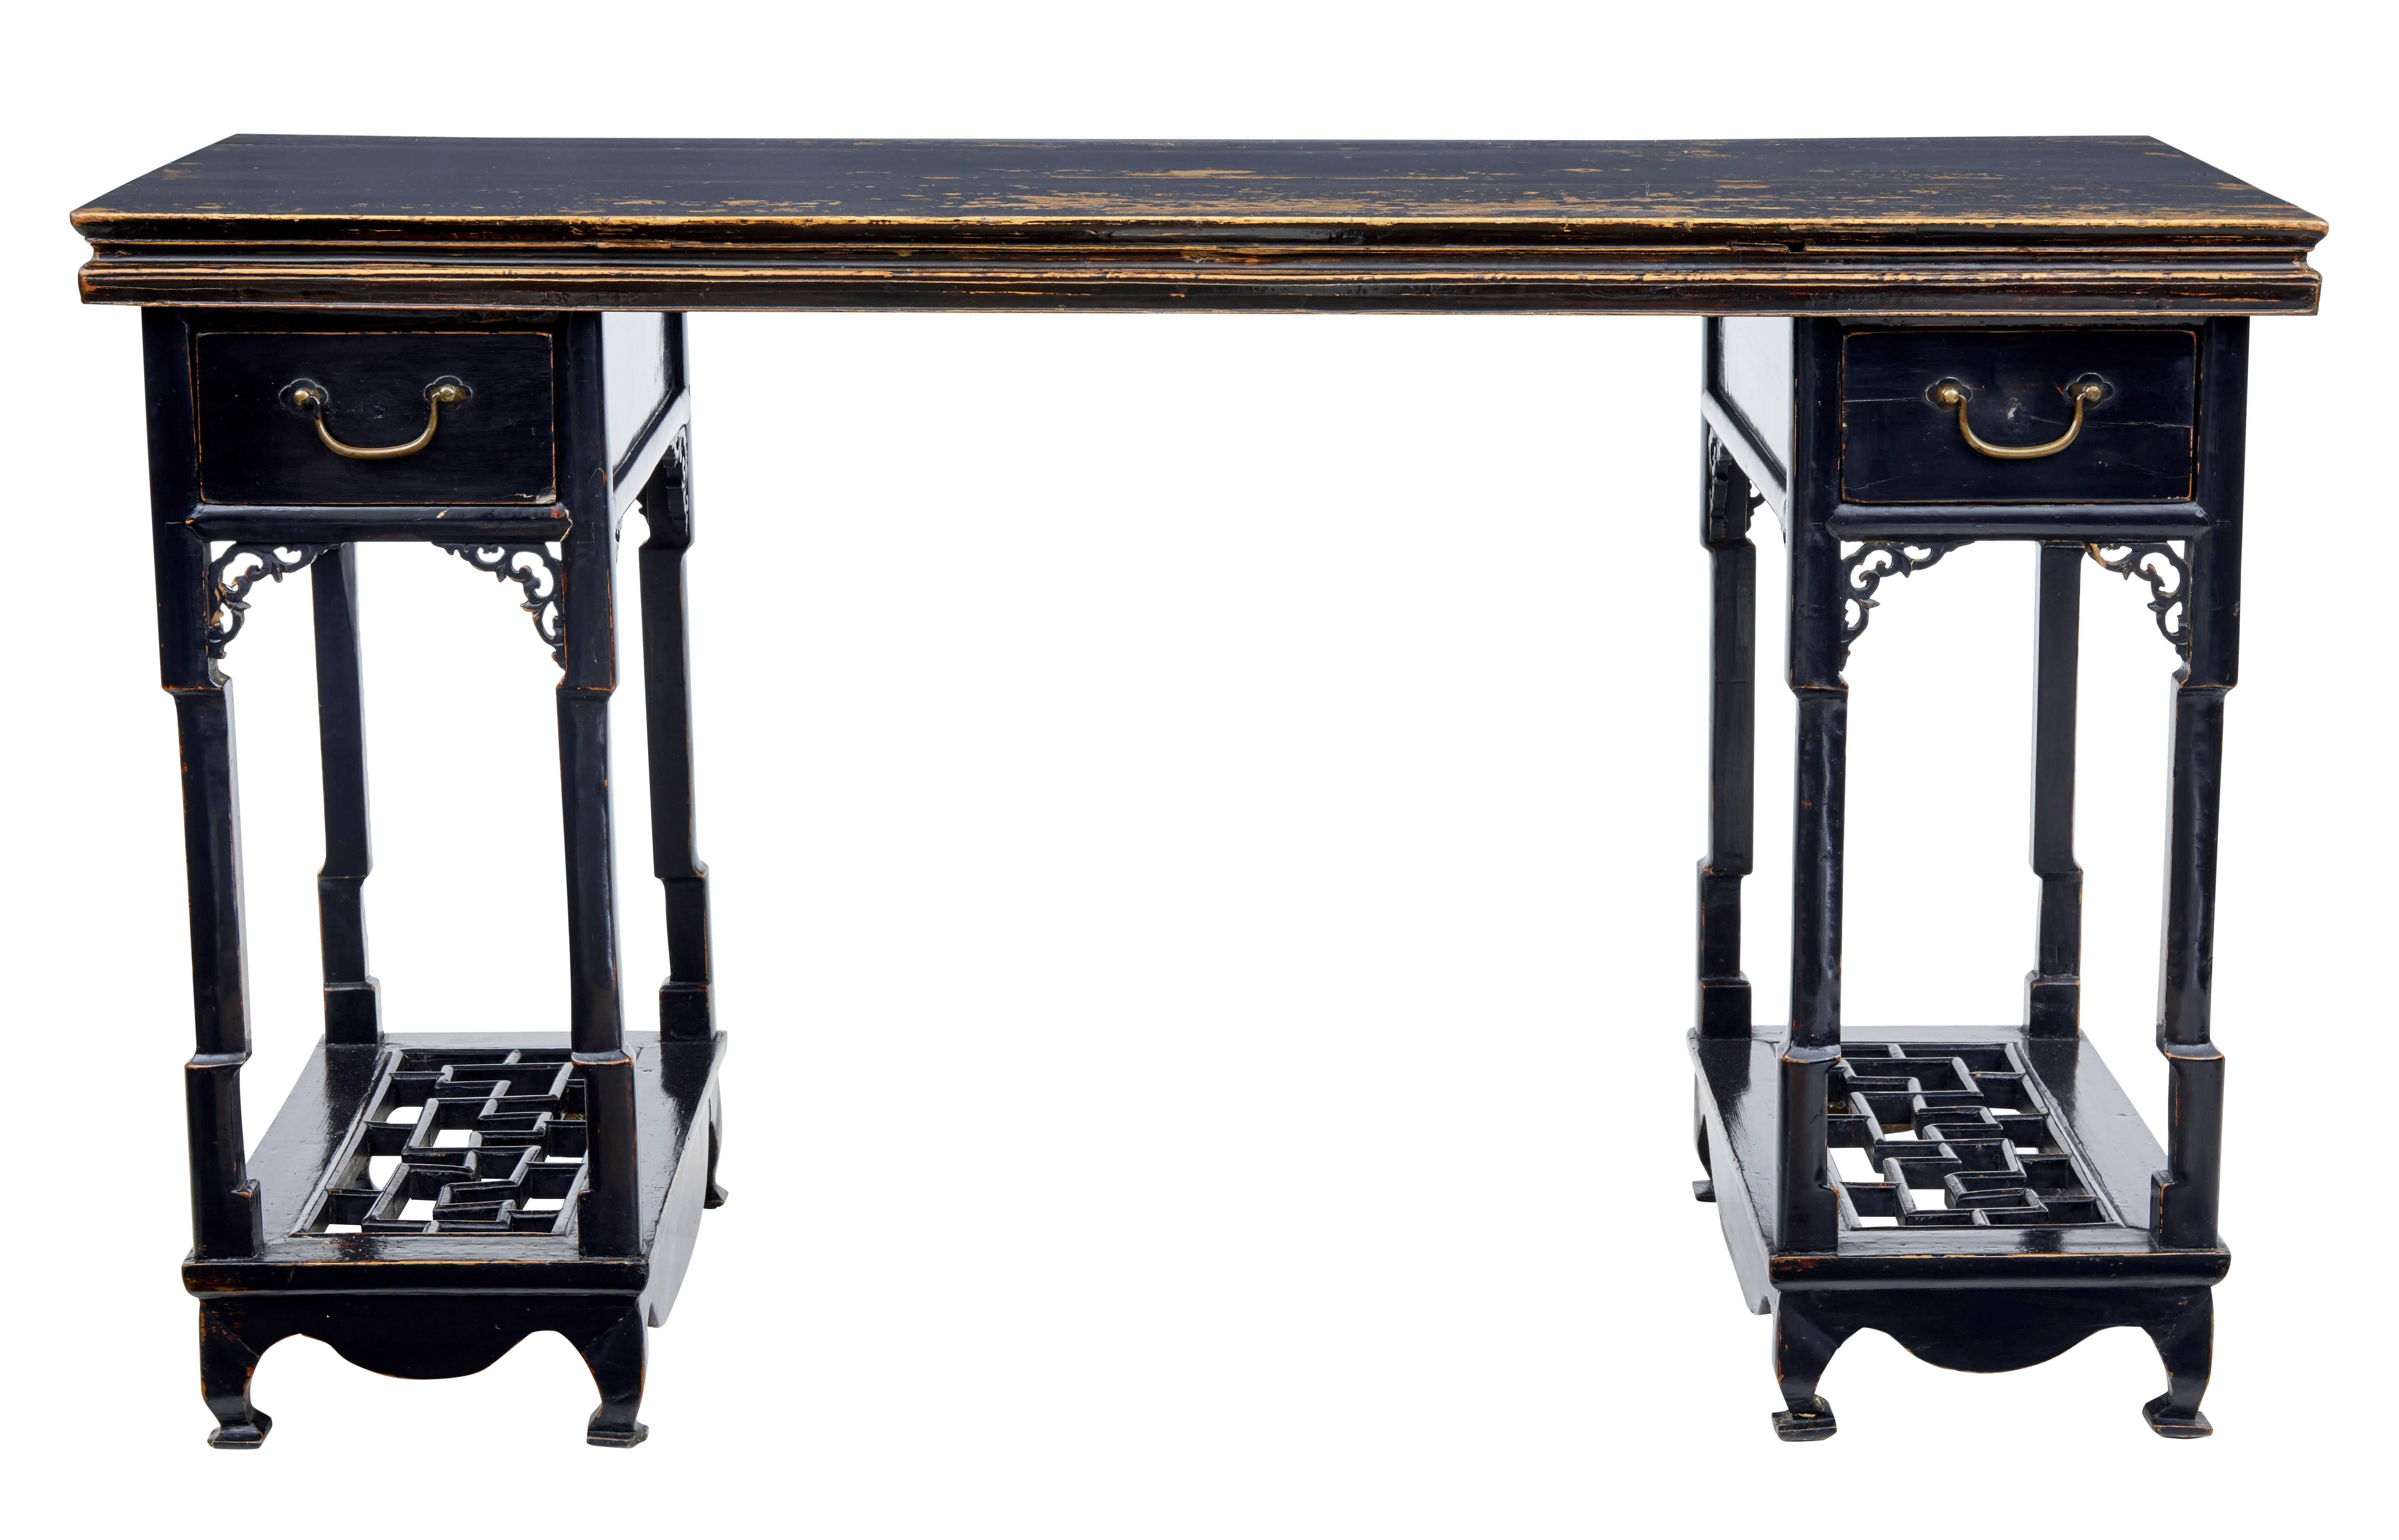 Chinese 19th century alter table, circa 1870.

Comprising of three parts, two pedestals and top surface. Presented in black lacquer which has worn through.

Now useful as a desk with a drawer in each pedestal and lower pierced carved shelf.